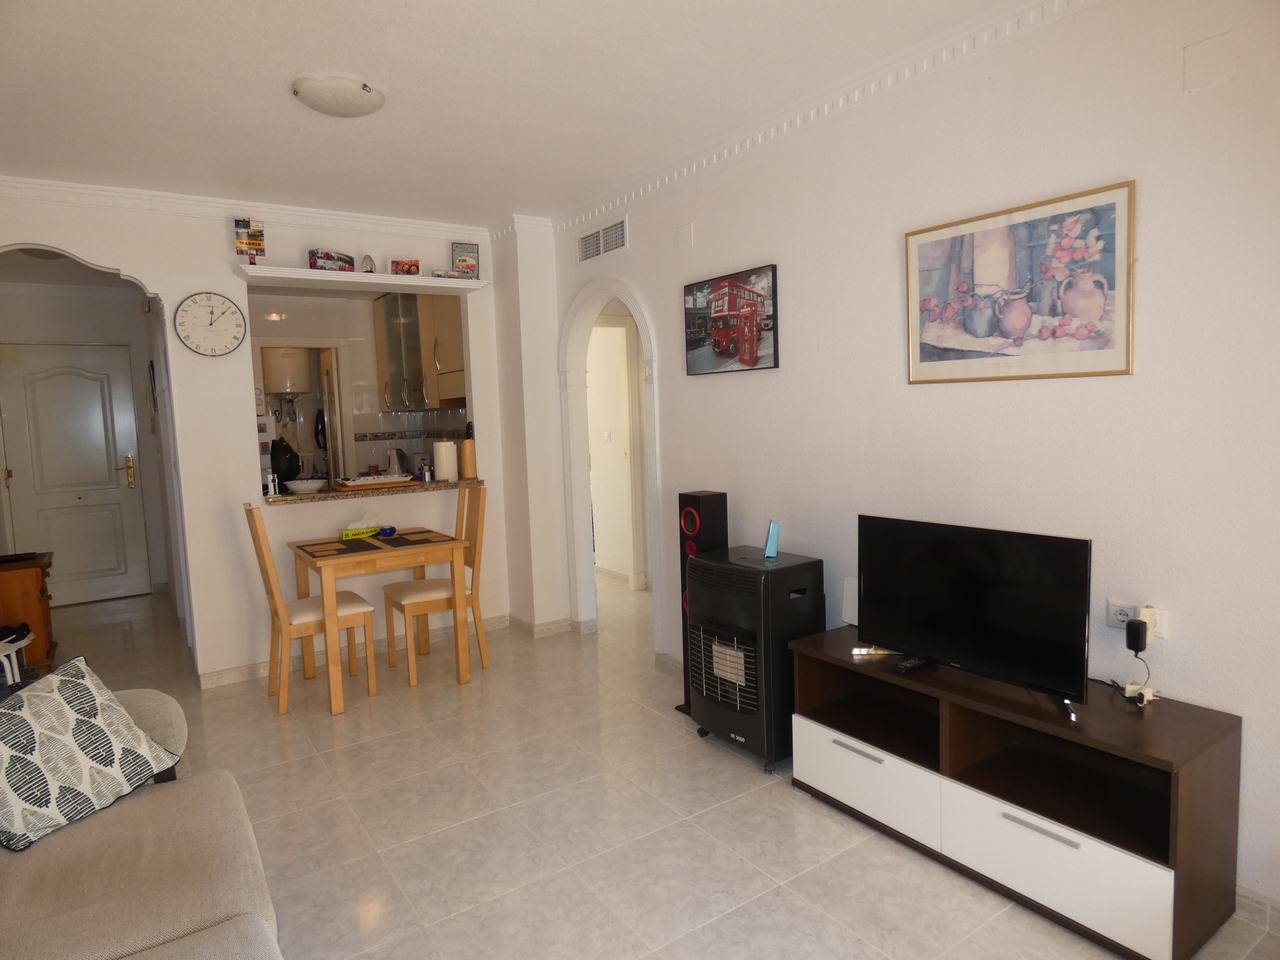 HCB-589: Apartment for sale in Algorfa